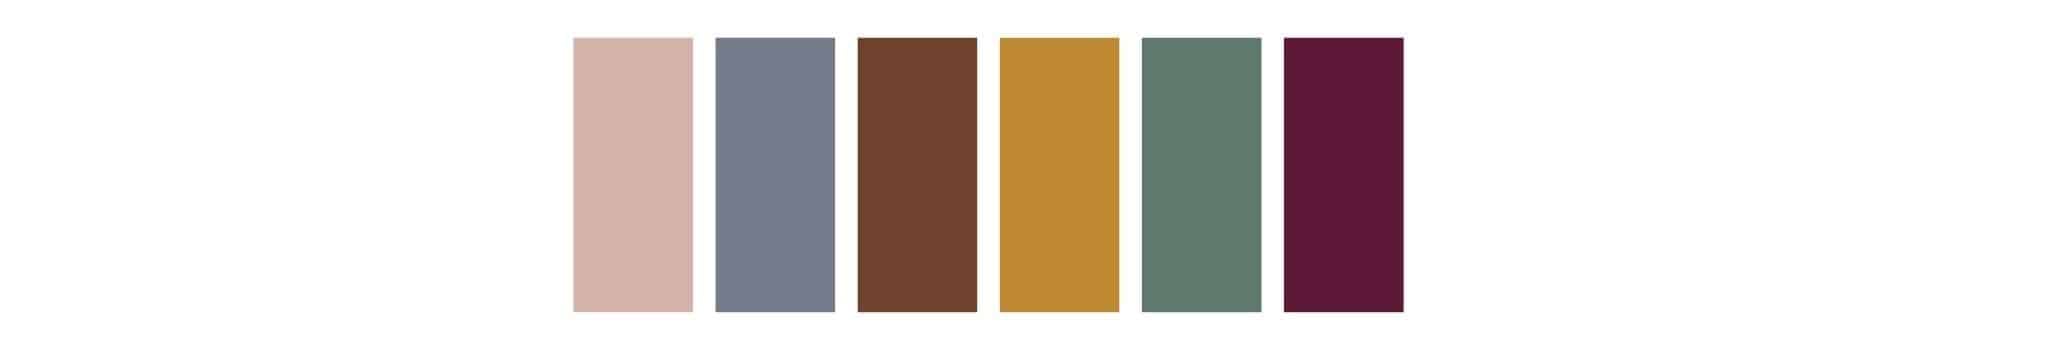 A palette of popular fall colors for 2022.